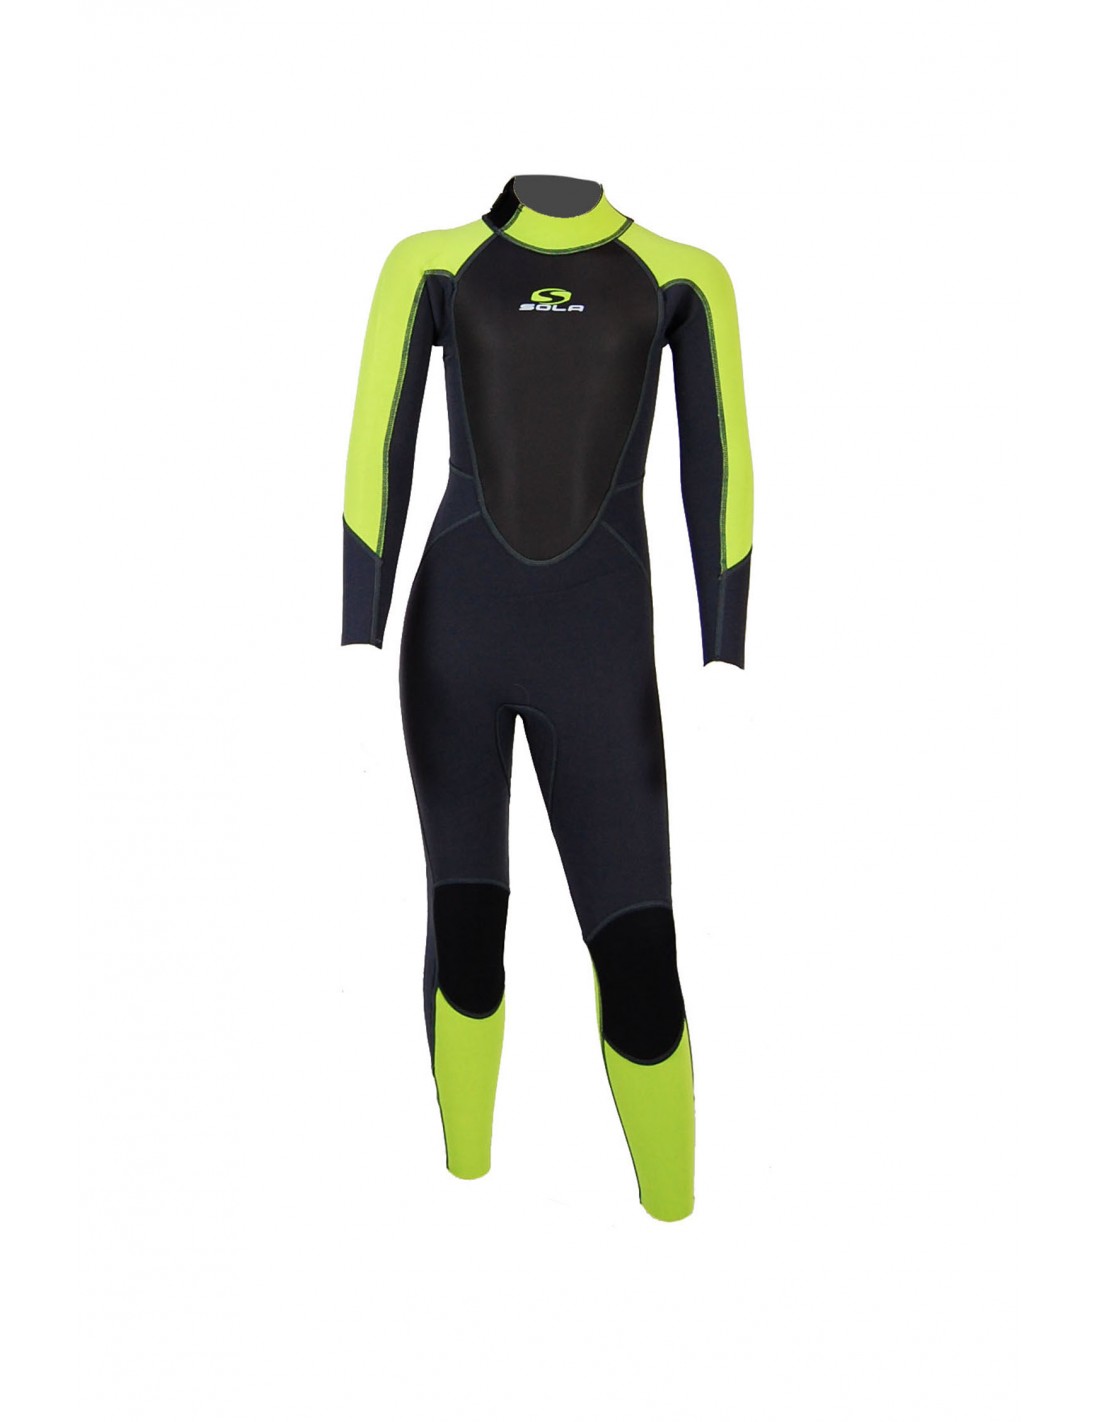 Sola Ignite 3/2mm Kids Wetsuit Size S 